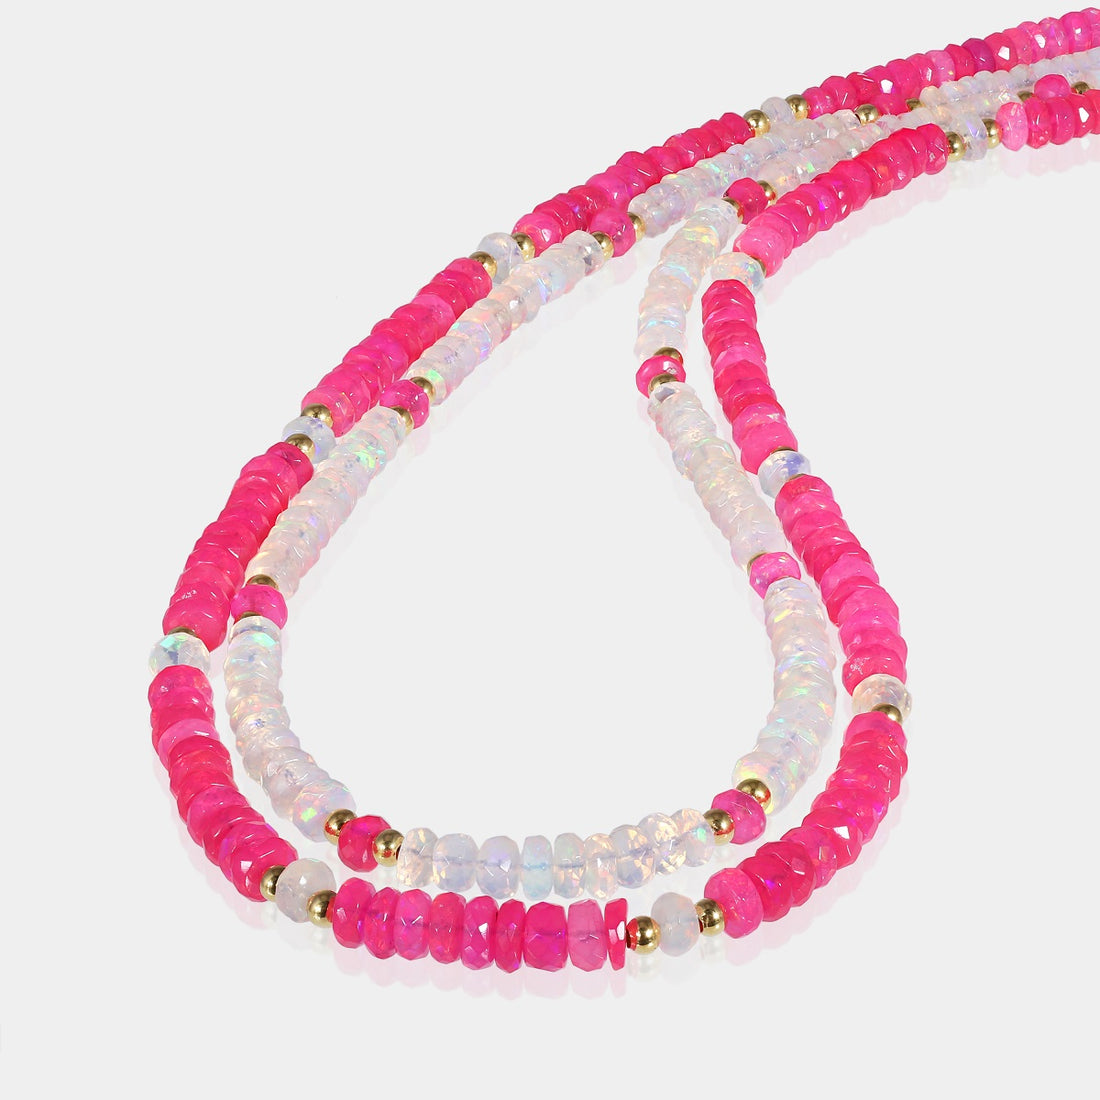 Pink and White Beads Double Layer Gemstone Necklace